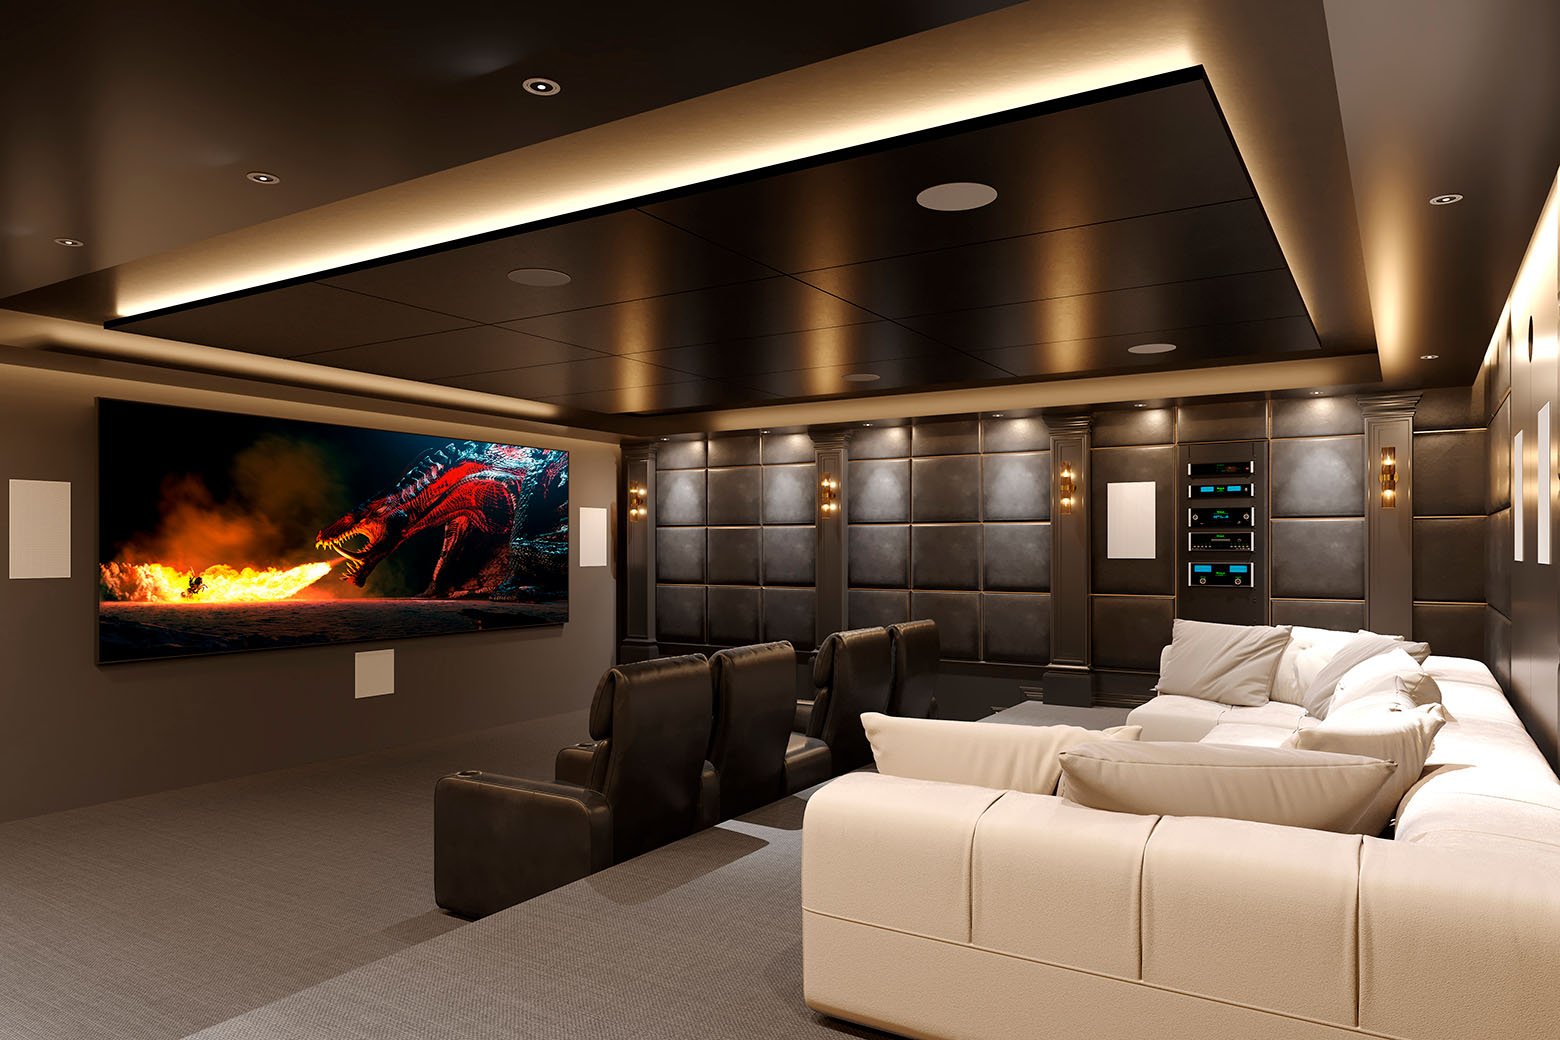 Advantages of a Dedicated Home Theater